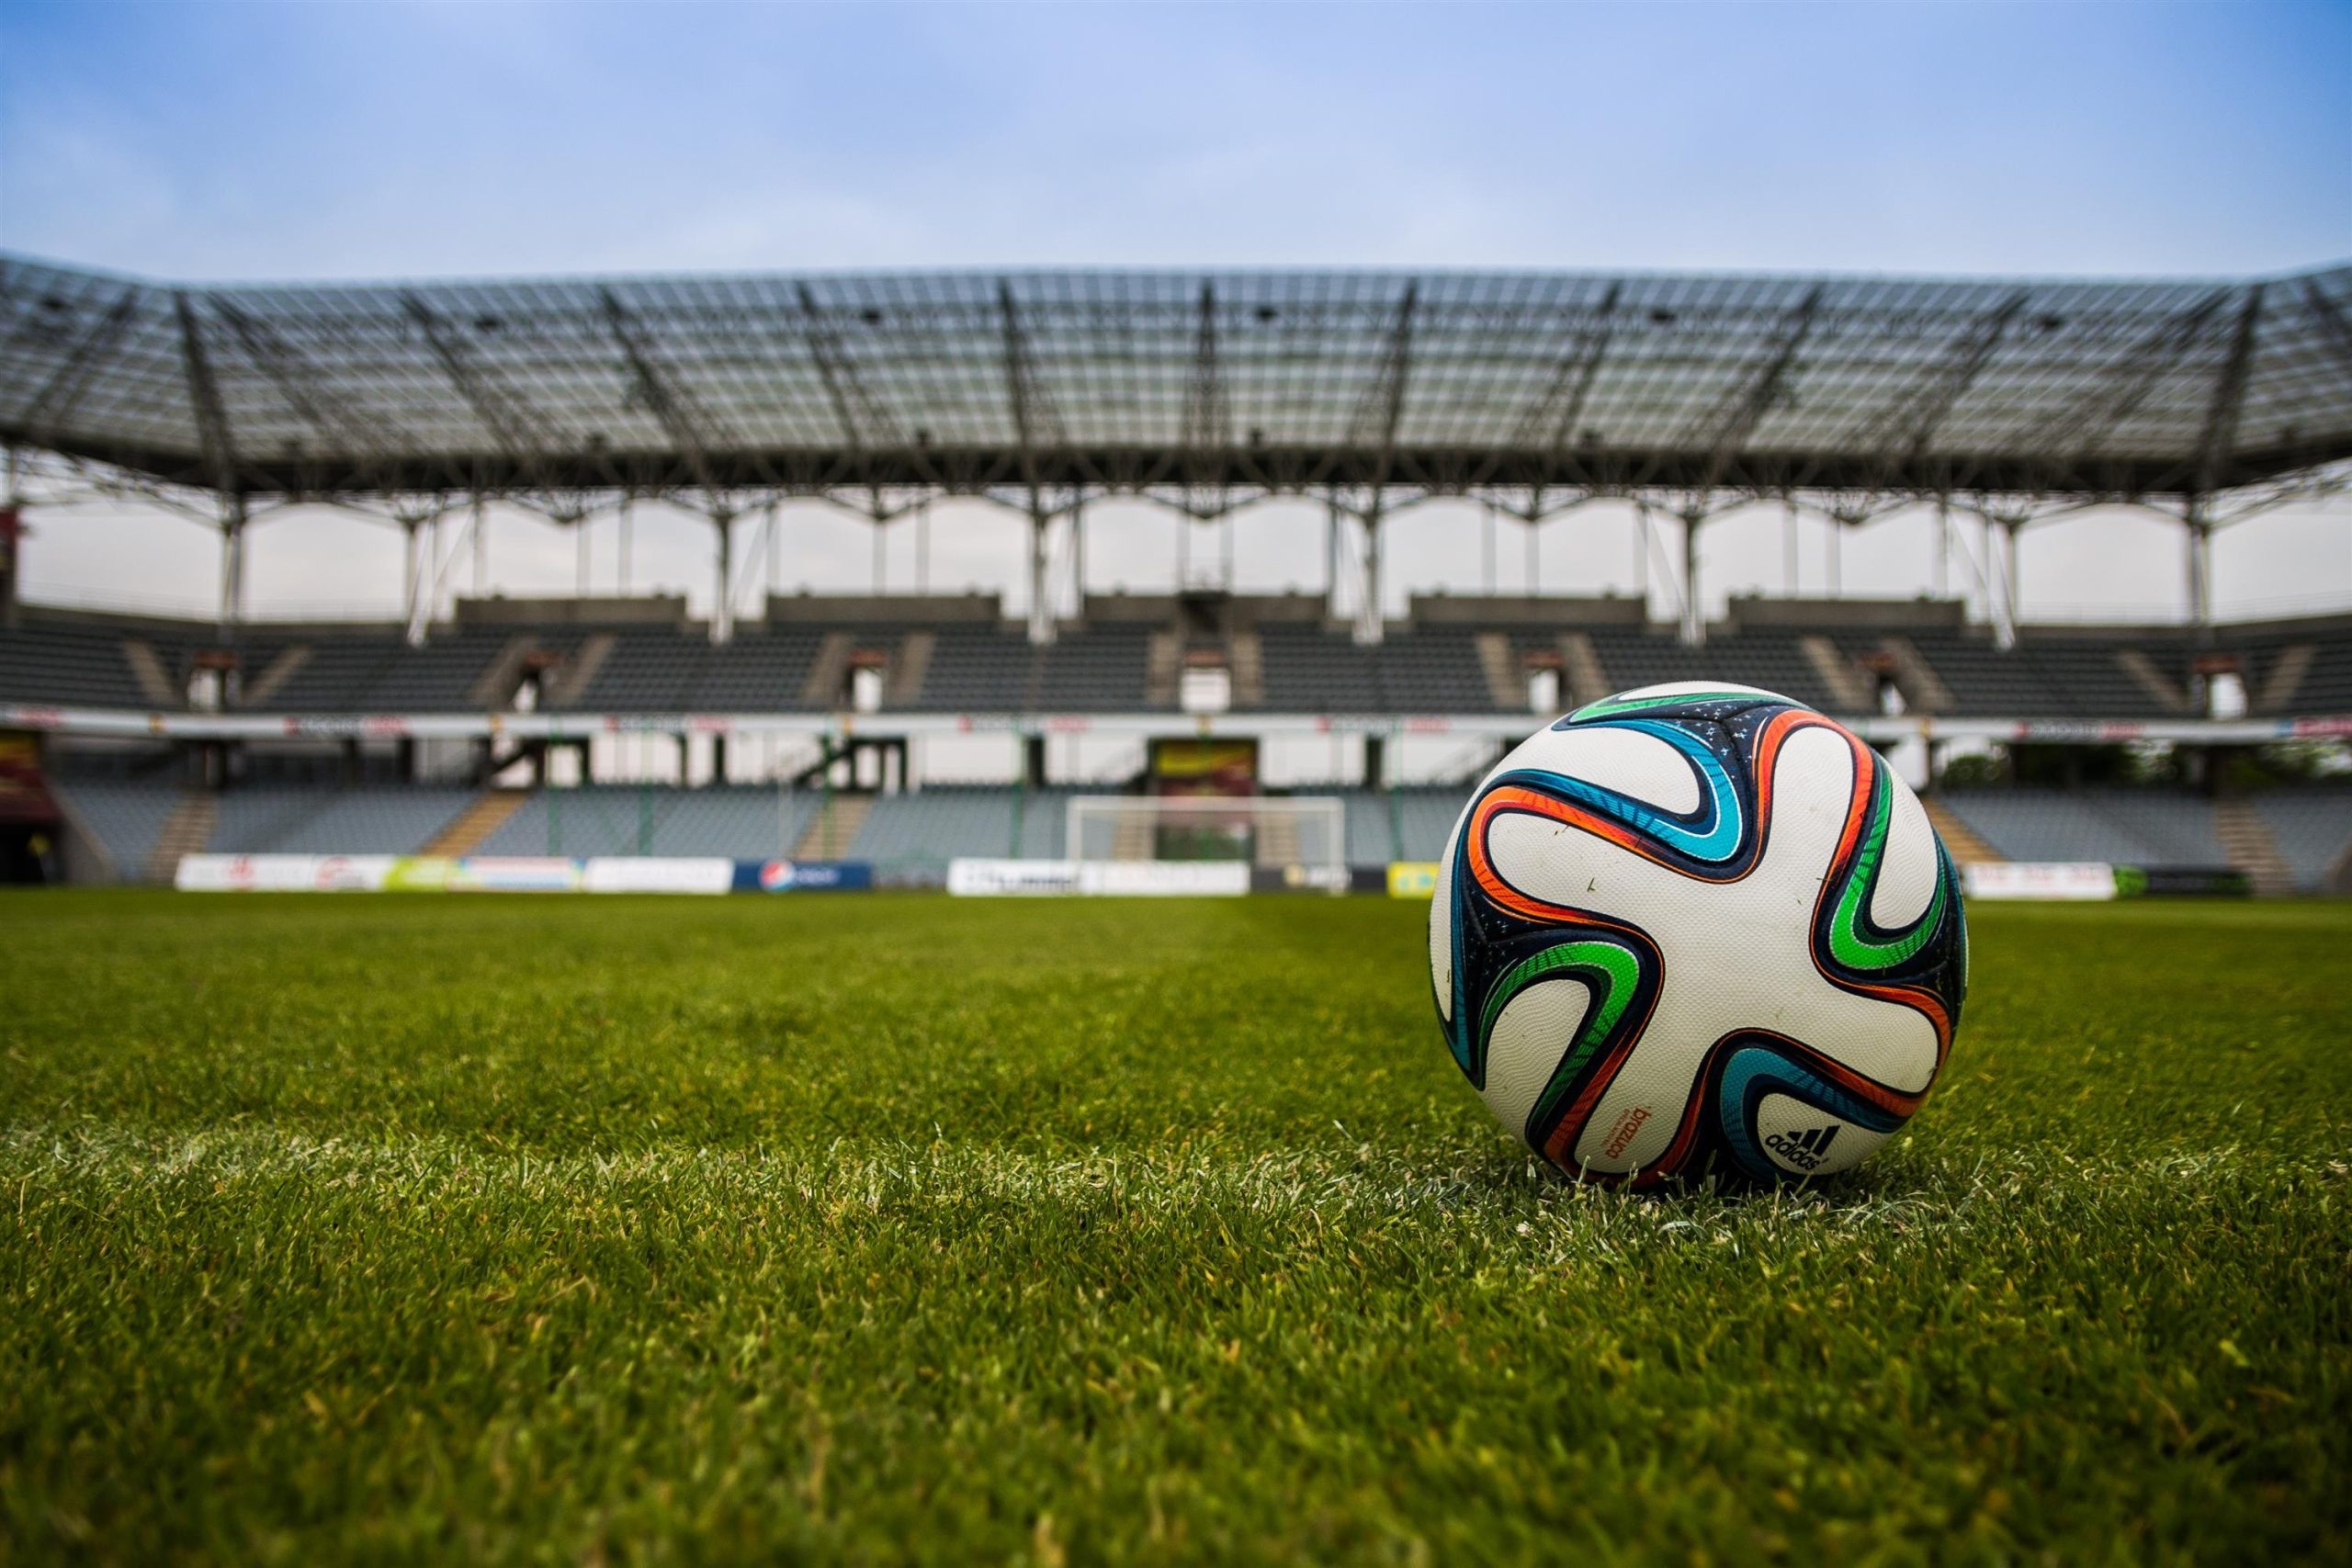 An image showcasing a football kept on a field that is being used as a cover image for a sports management portal case study